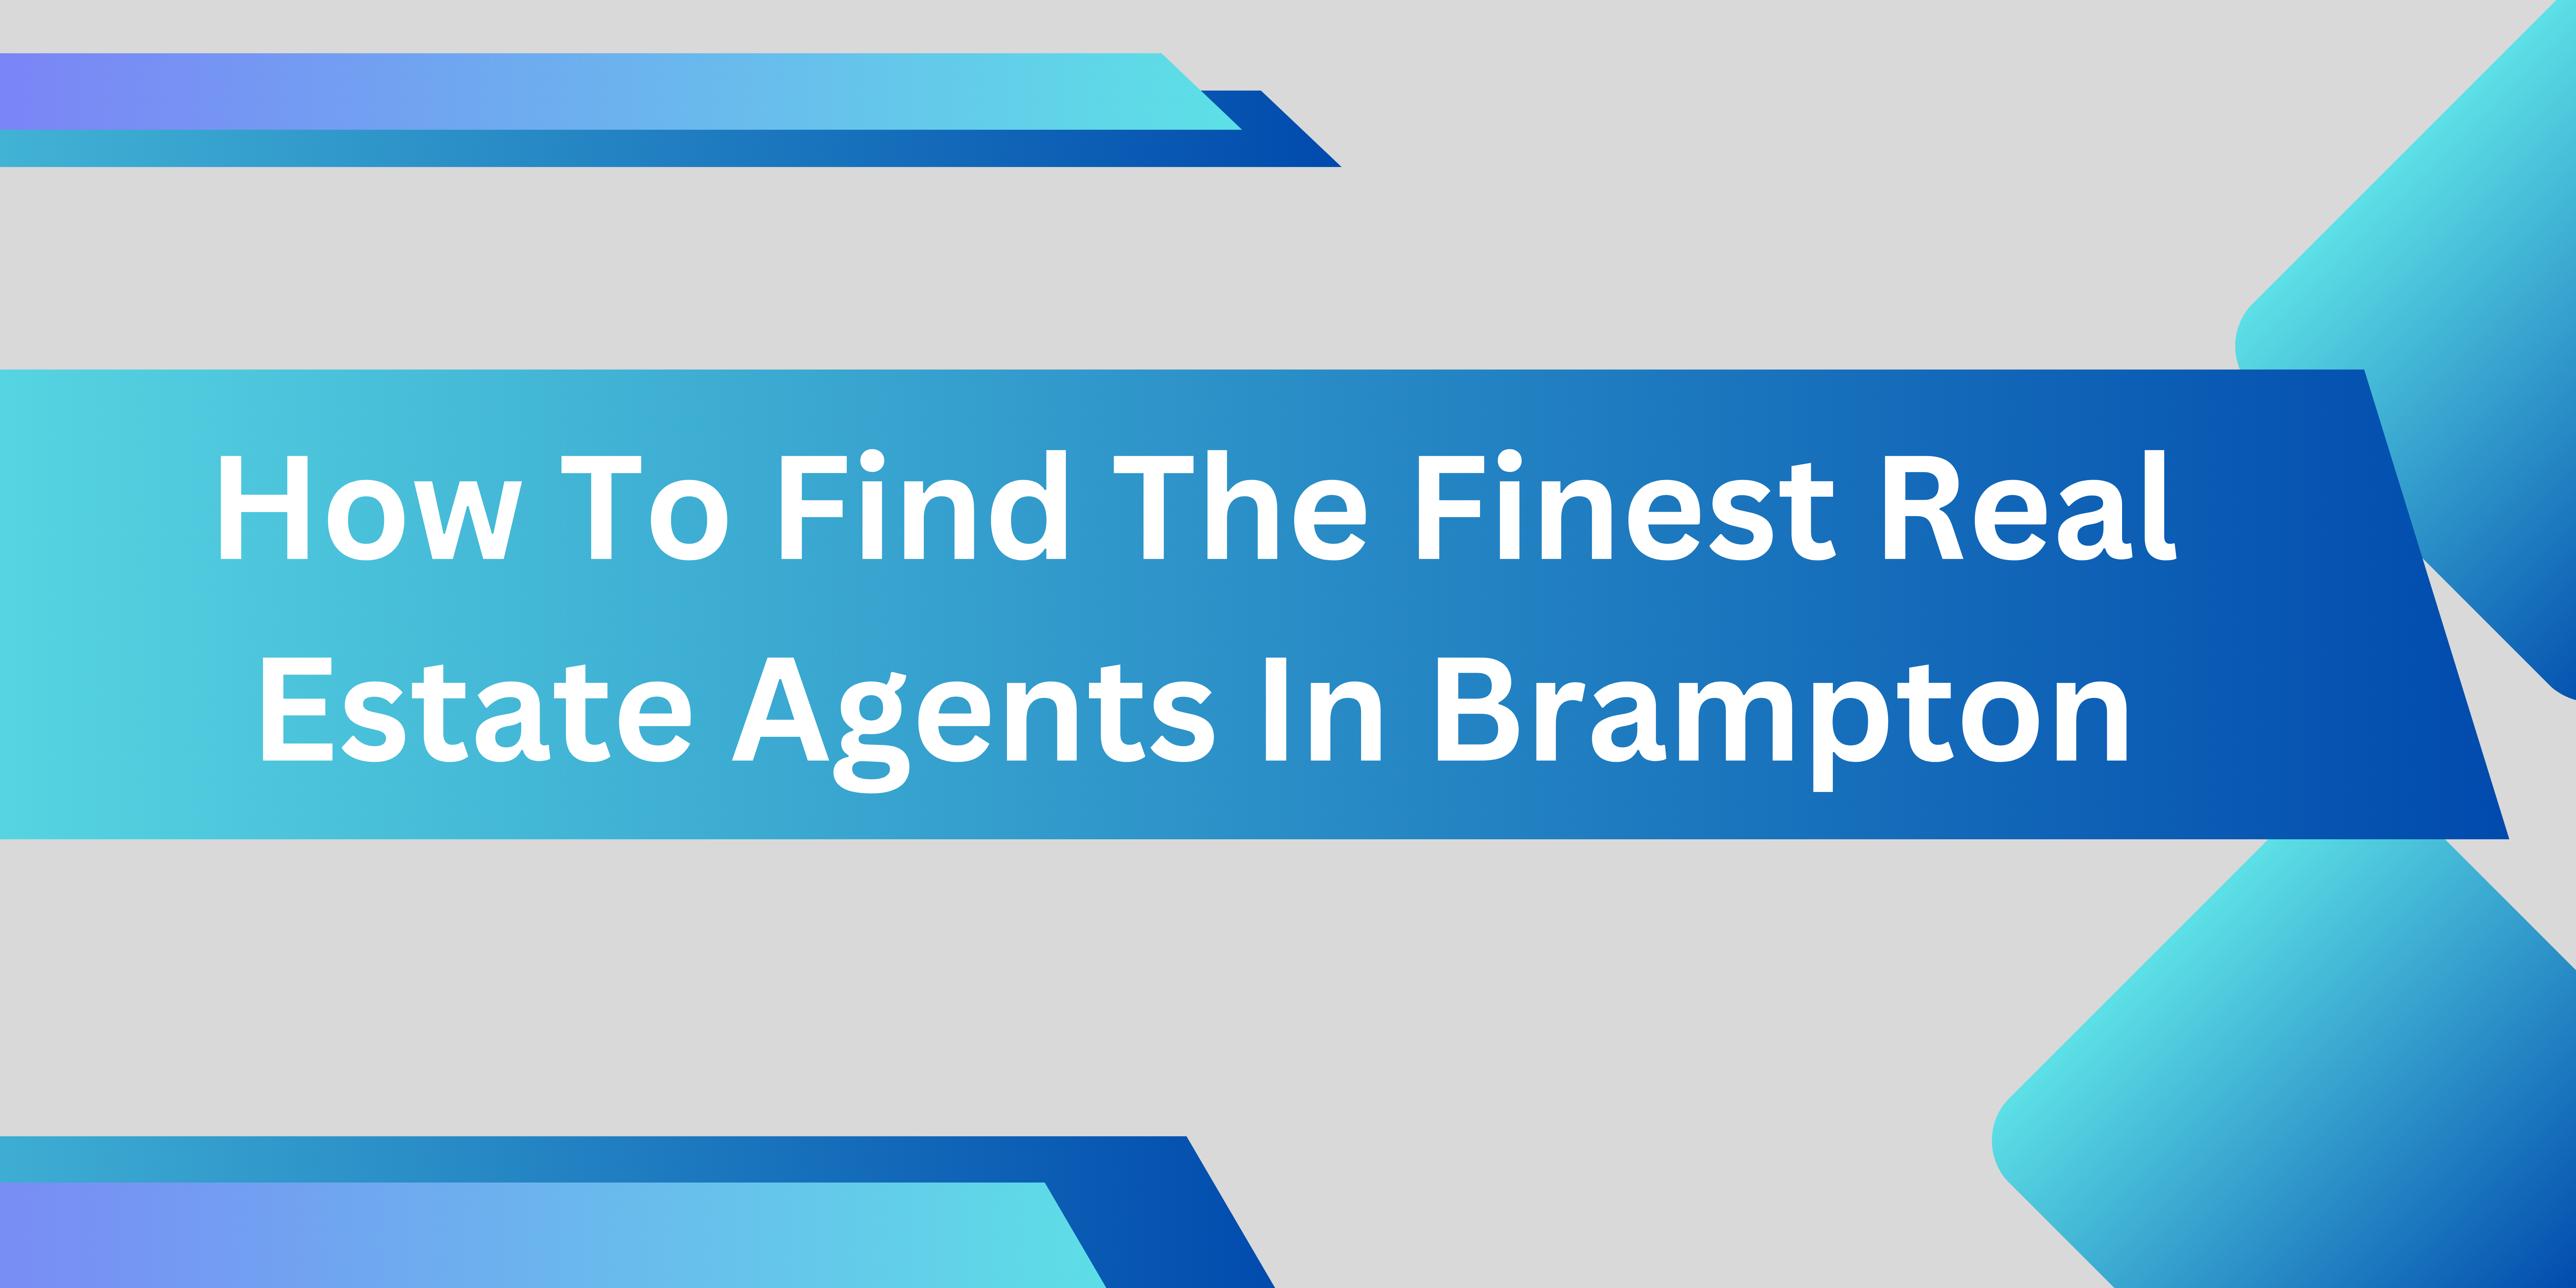 How to find the finest real estate agents in Brampton